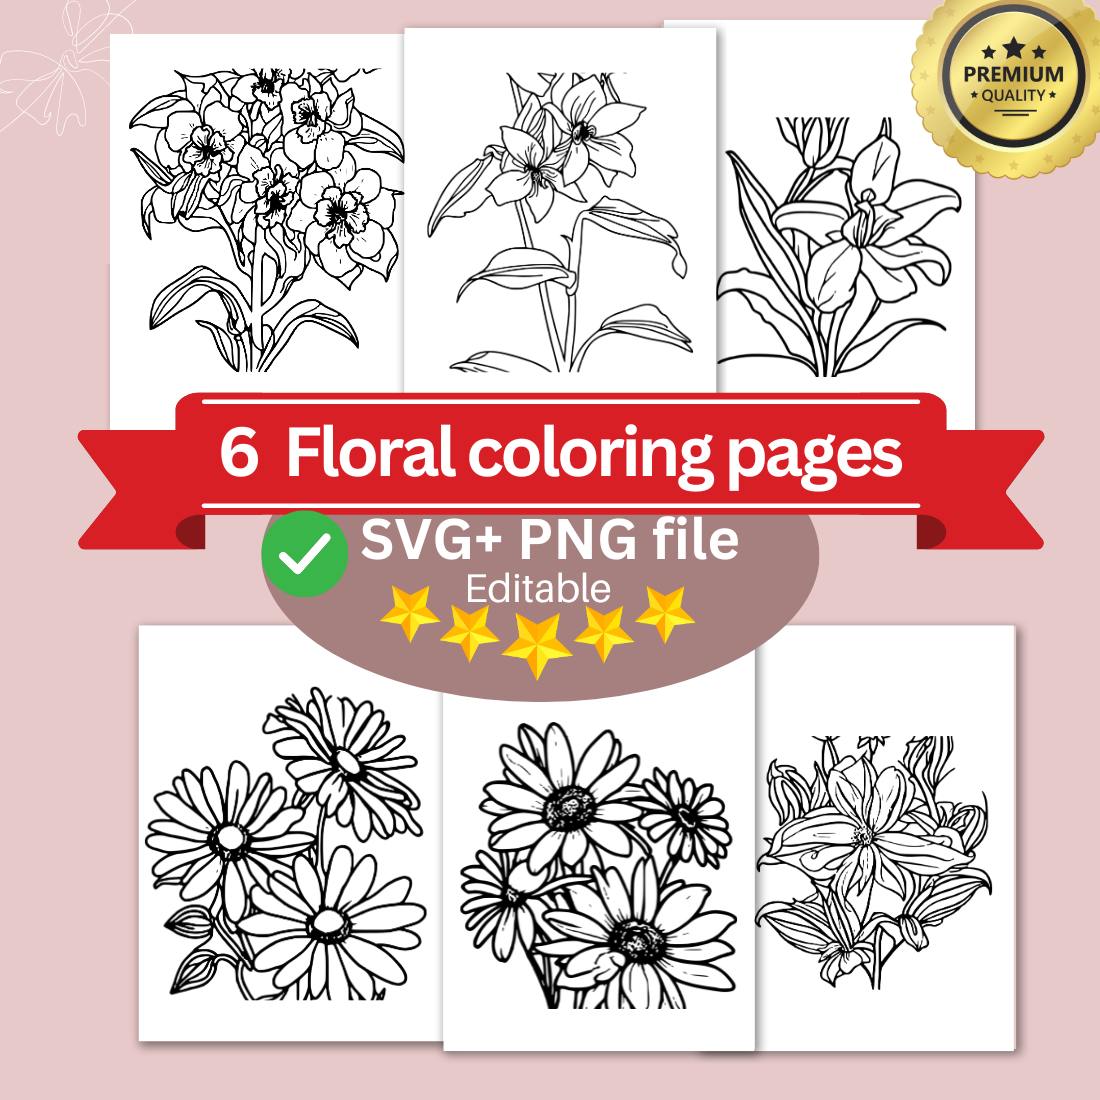 6 Flower Drawing Floral Coloring Pages bundle For Adults (SVG and PNG ) for KDP low content self-publishing cover image.